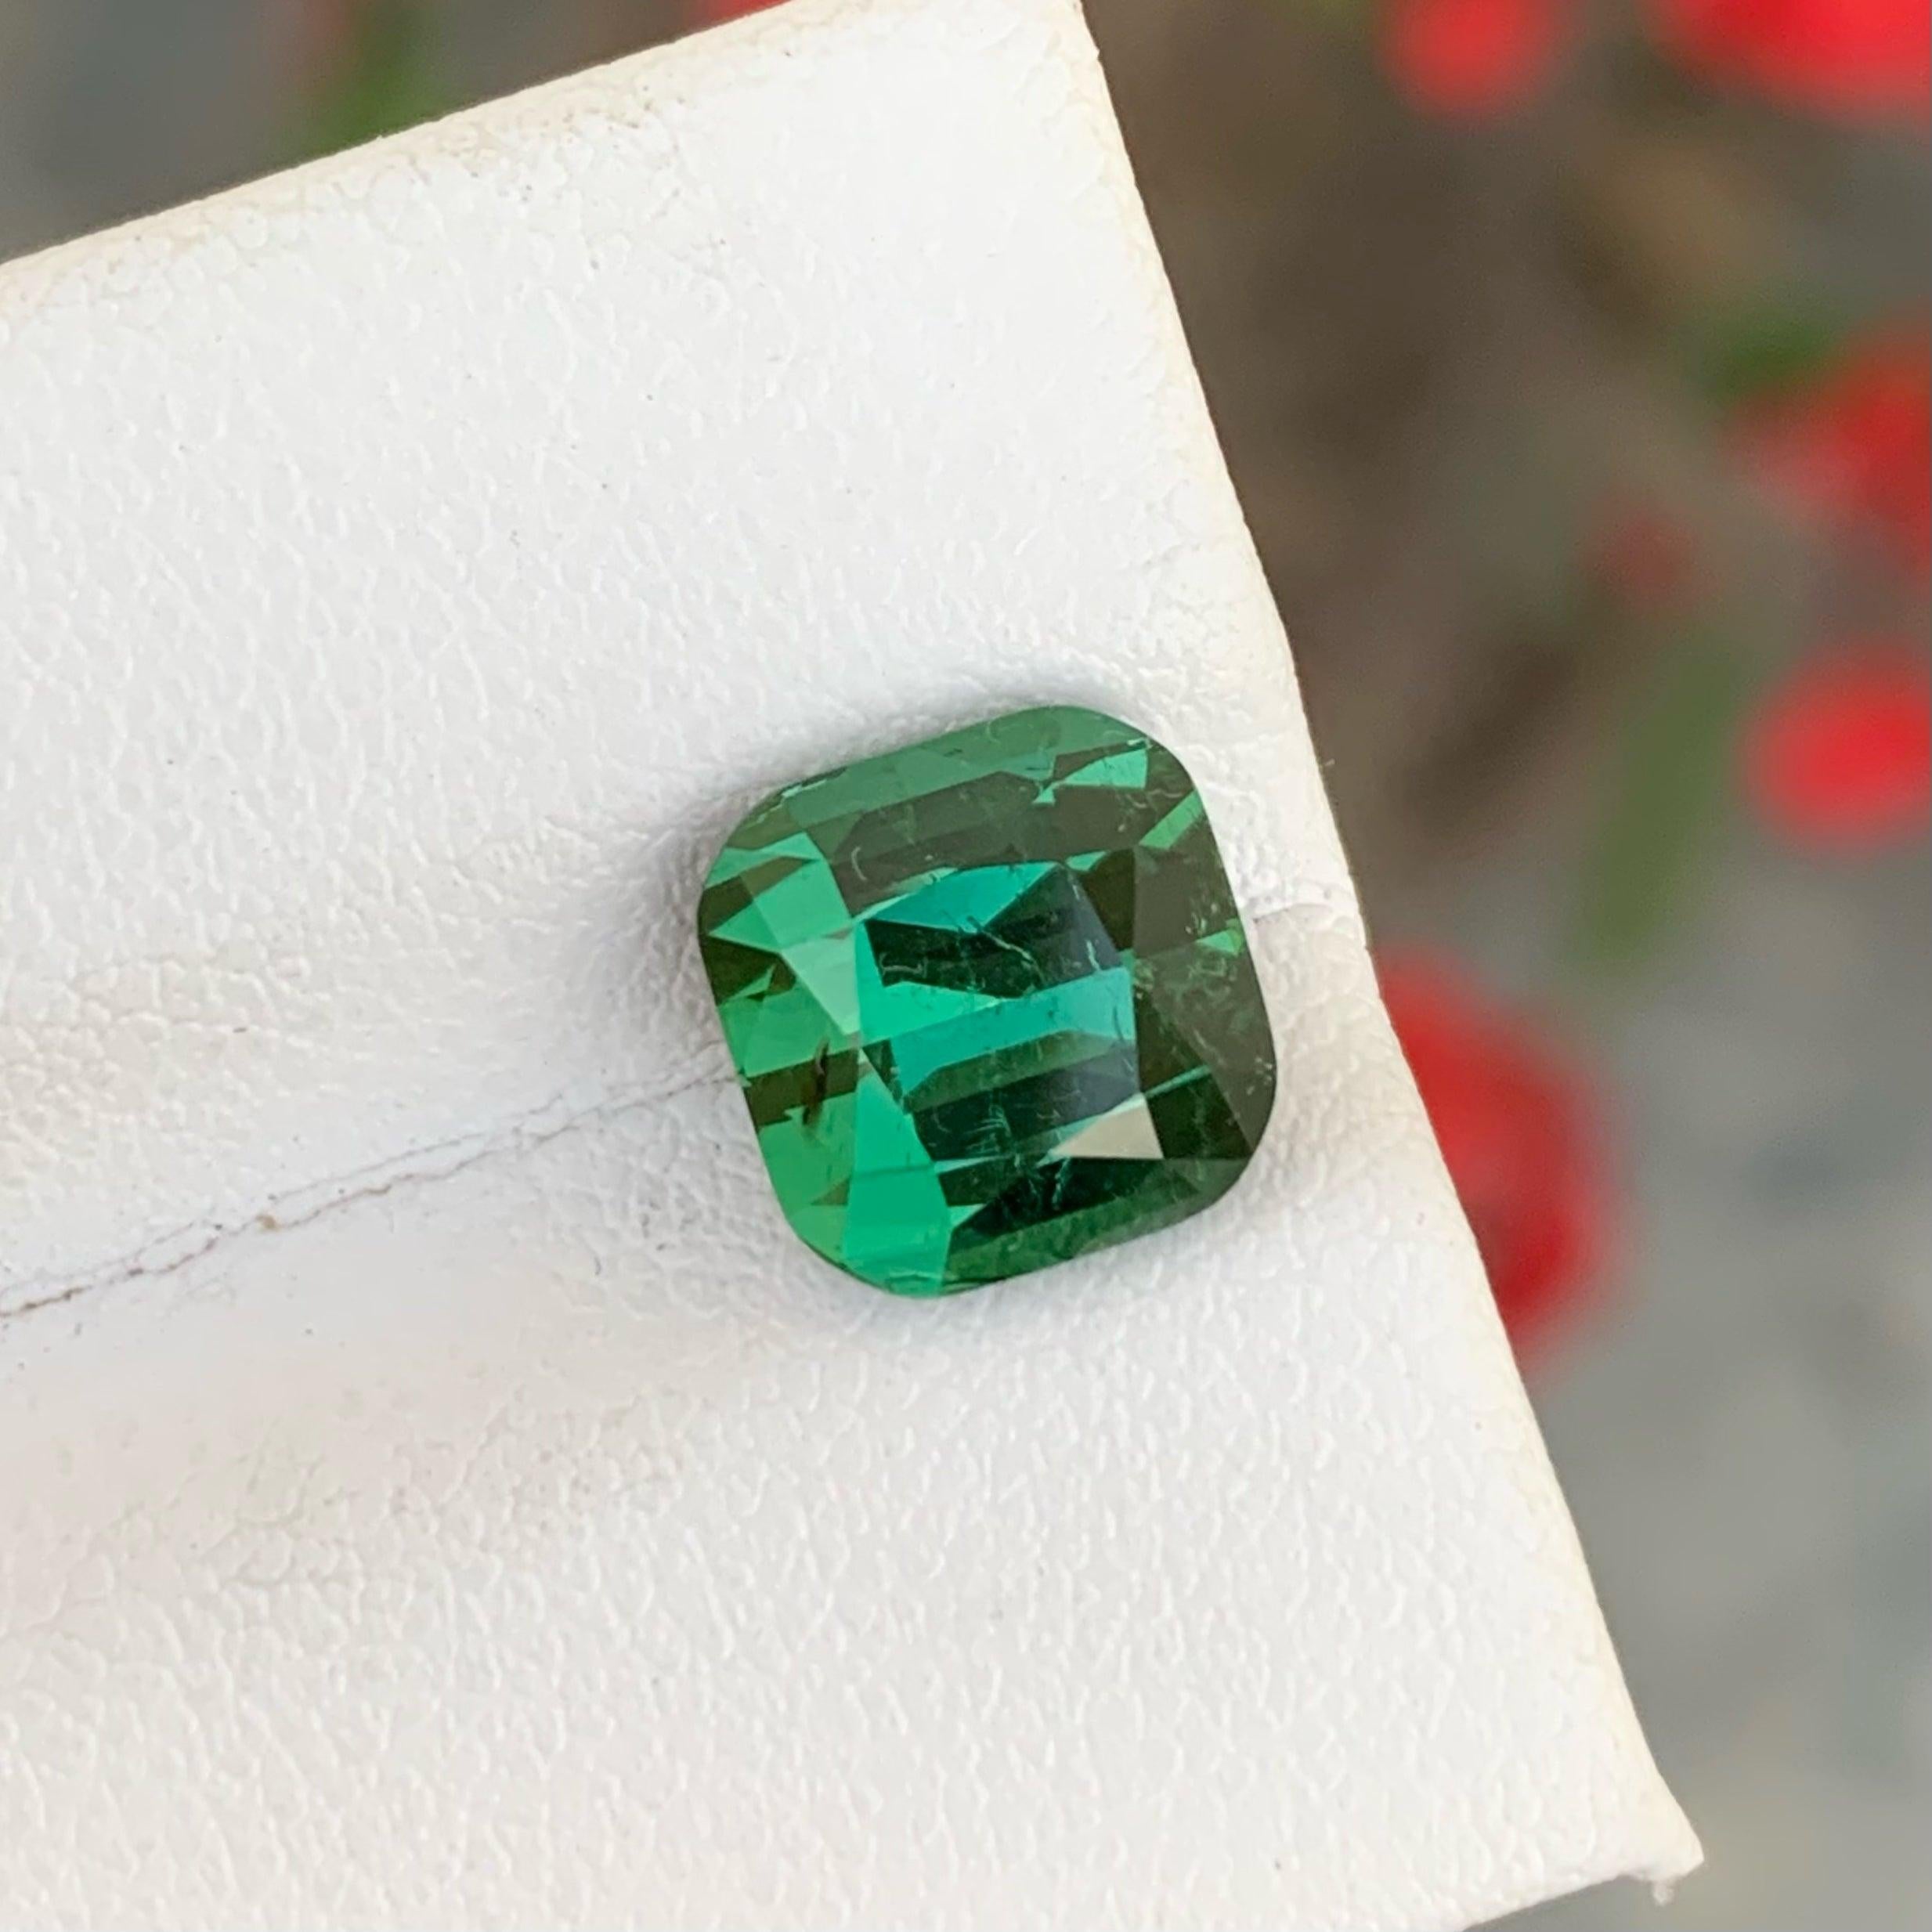 Fancy Greenish Blue Loose Tourmaline Gemstone, Available For Sale At Wholesale Price Natural High Quality 3.60 Carats Natural Tourmaline From Afghanistan.

Product Information:
GEMSTONE TYPE:	Fancy Greenish Blue Loose Tourmaline